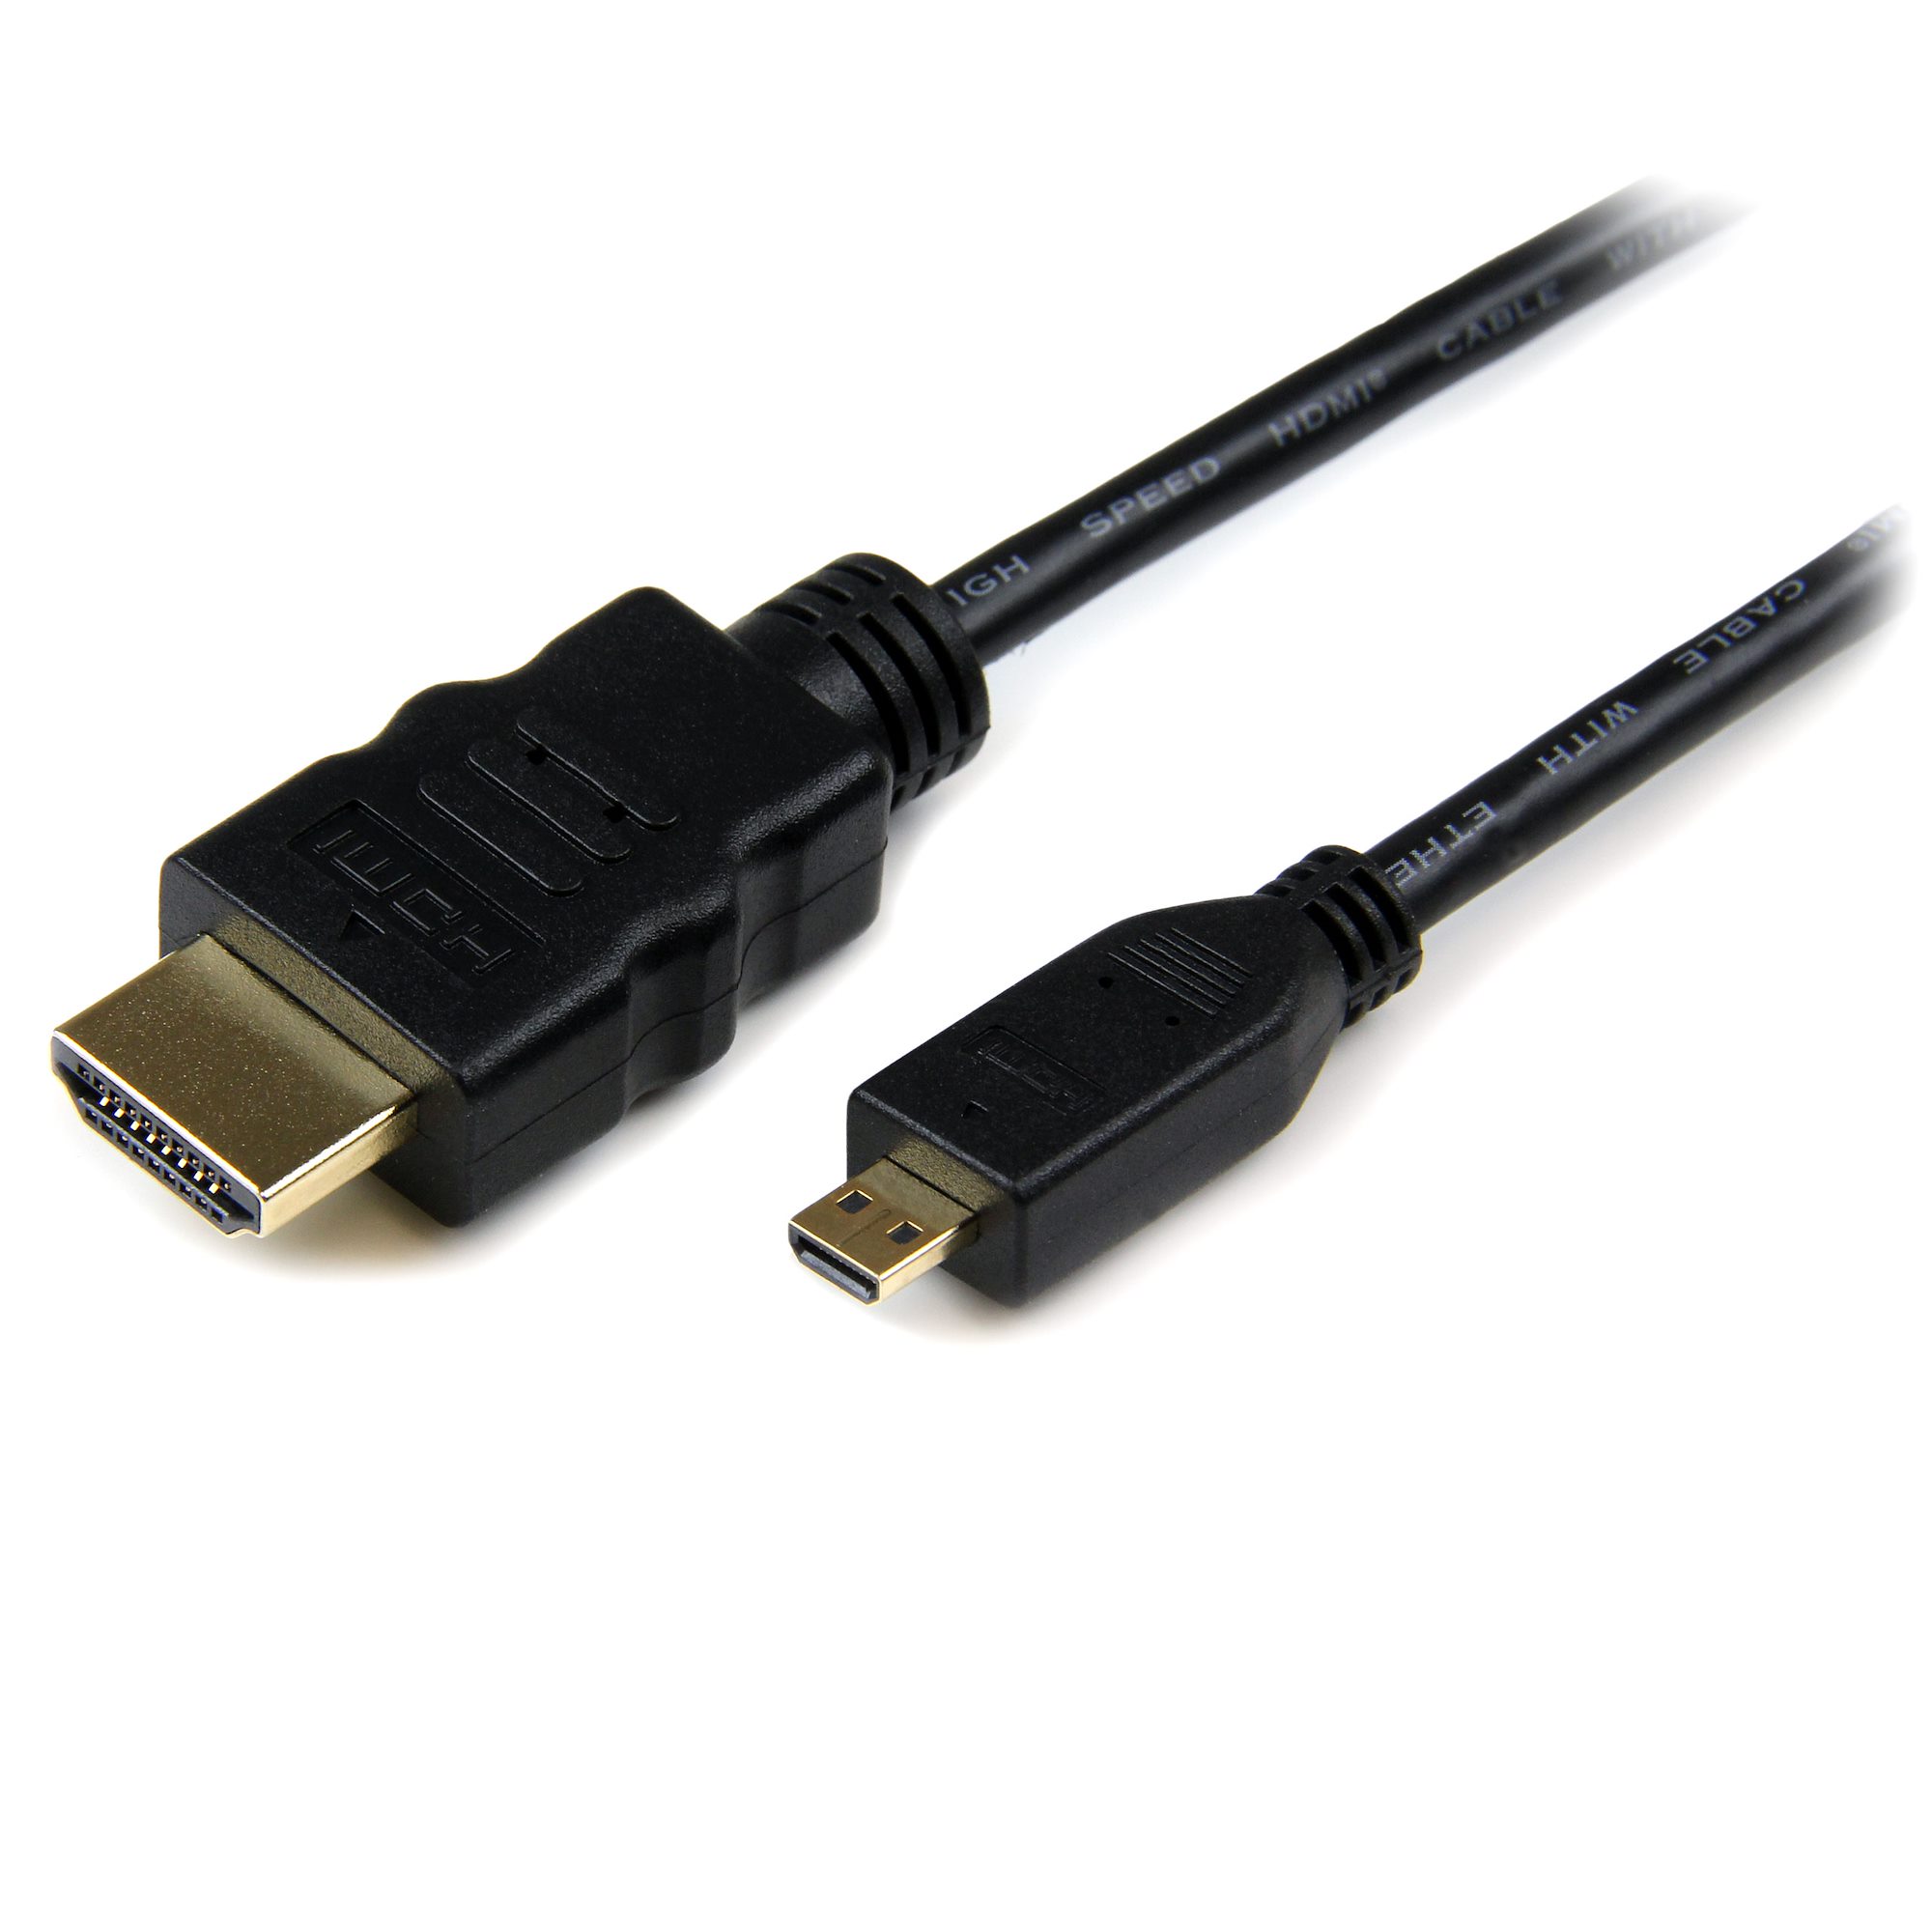 【HDADMM50CM】0.5M HIGH SPEED HDMI CABLE WITH